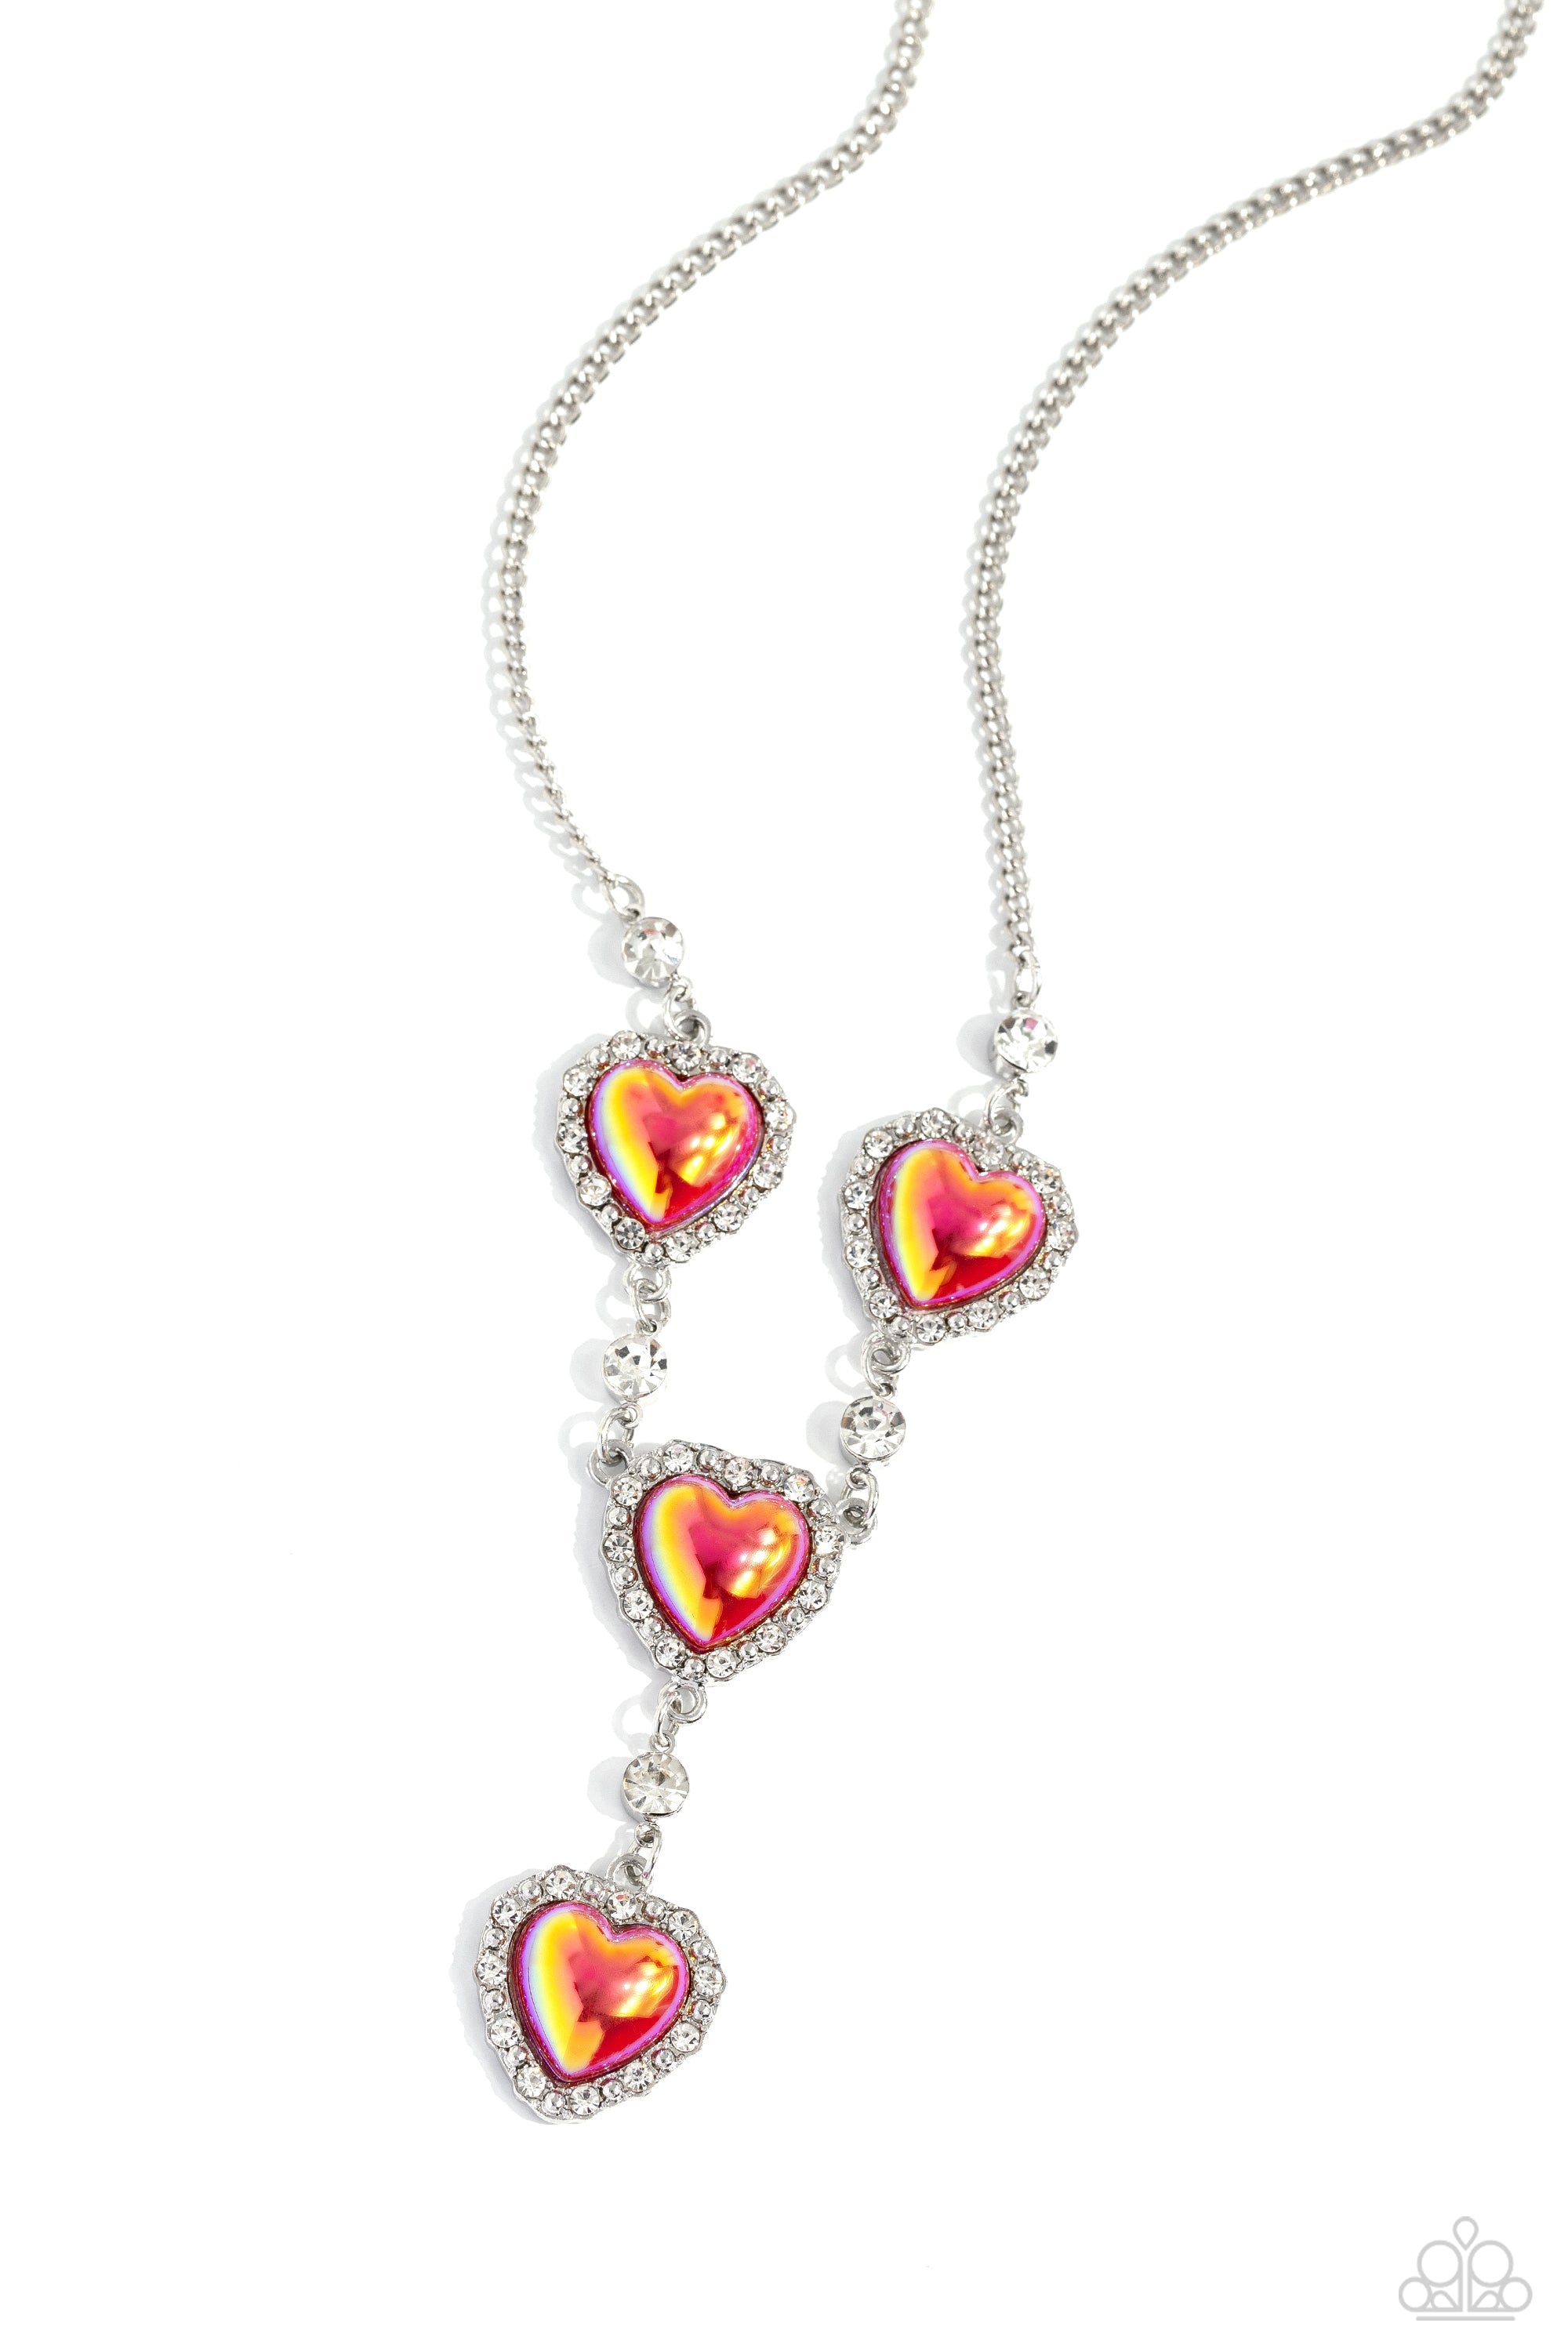 Stuck On You Red Heart Necklace - Paparazzi Accessories- lightbox - CarasShop.com - $5 Jewelry by Cara Jewels